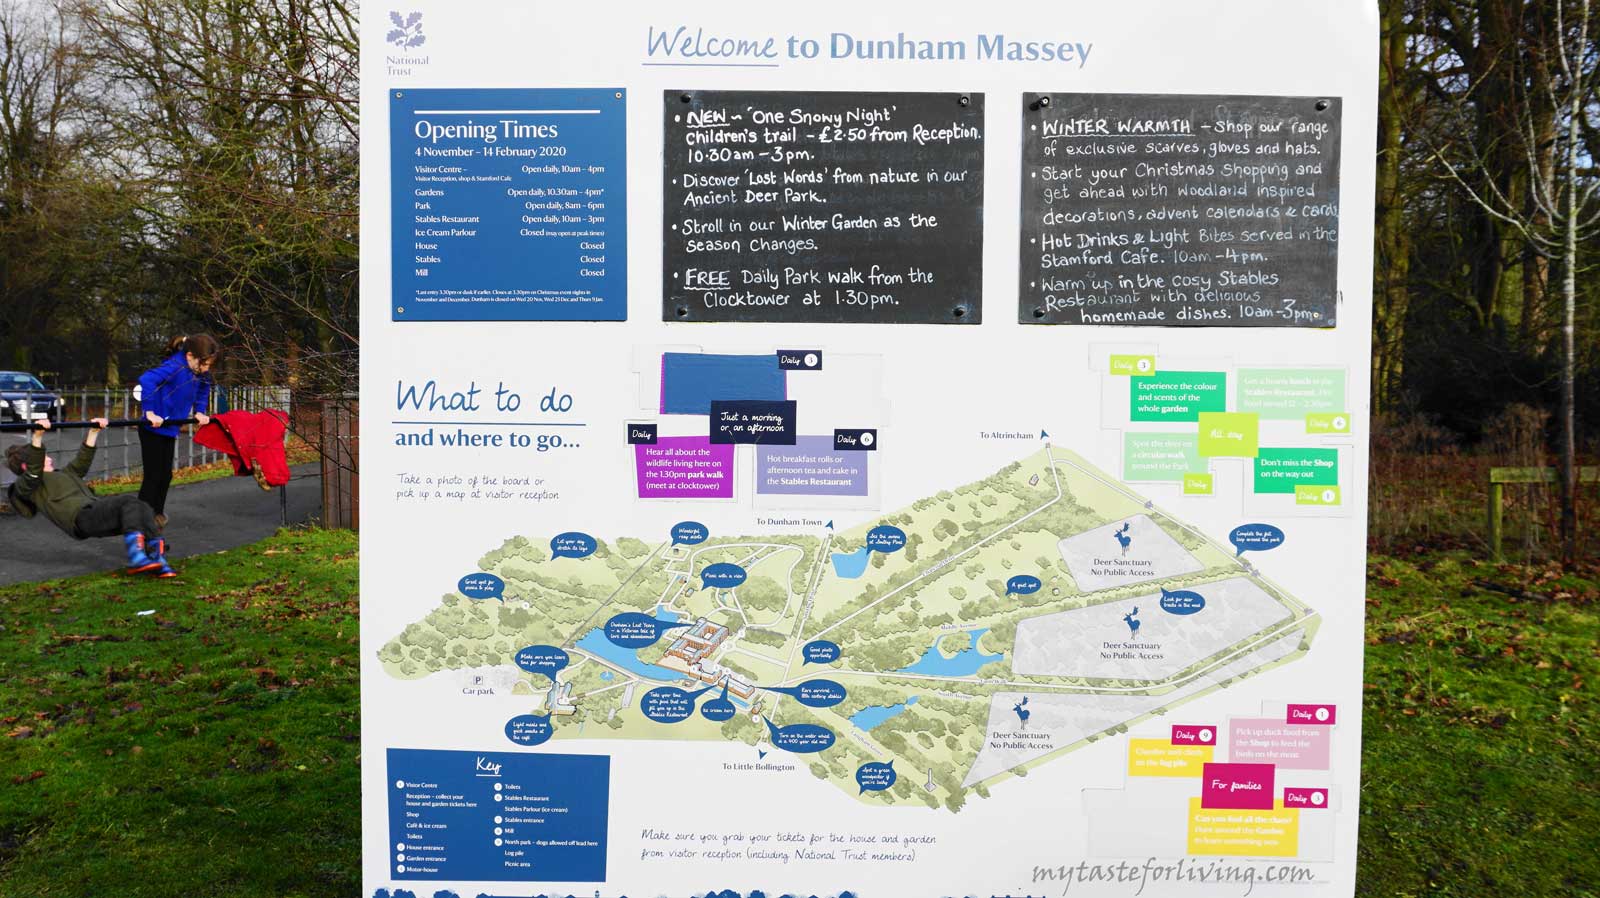 Duhnam Massey  is located in the north-west of England, near the city of Manchester, and is owned by the National Trust. 